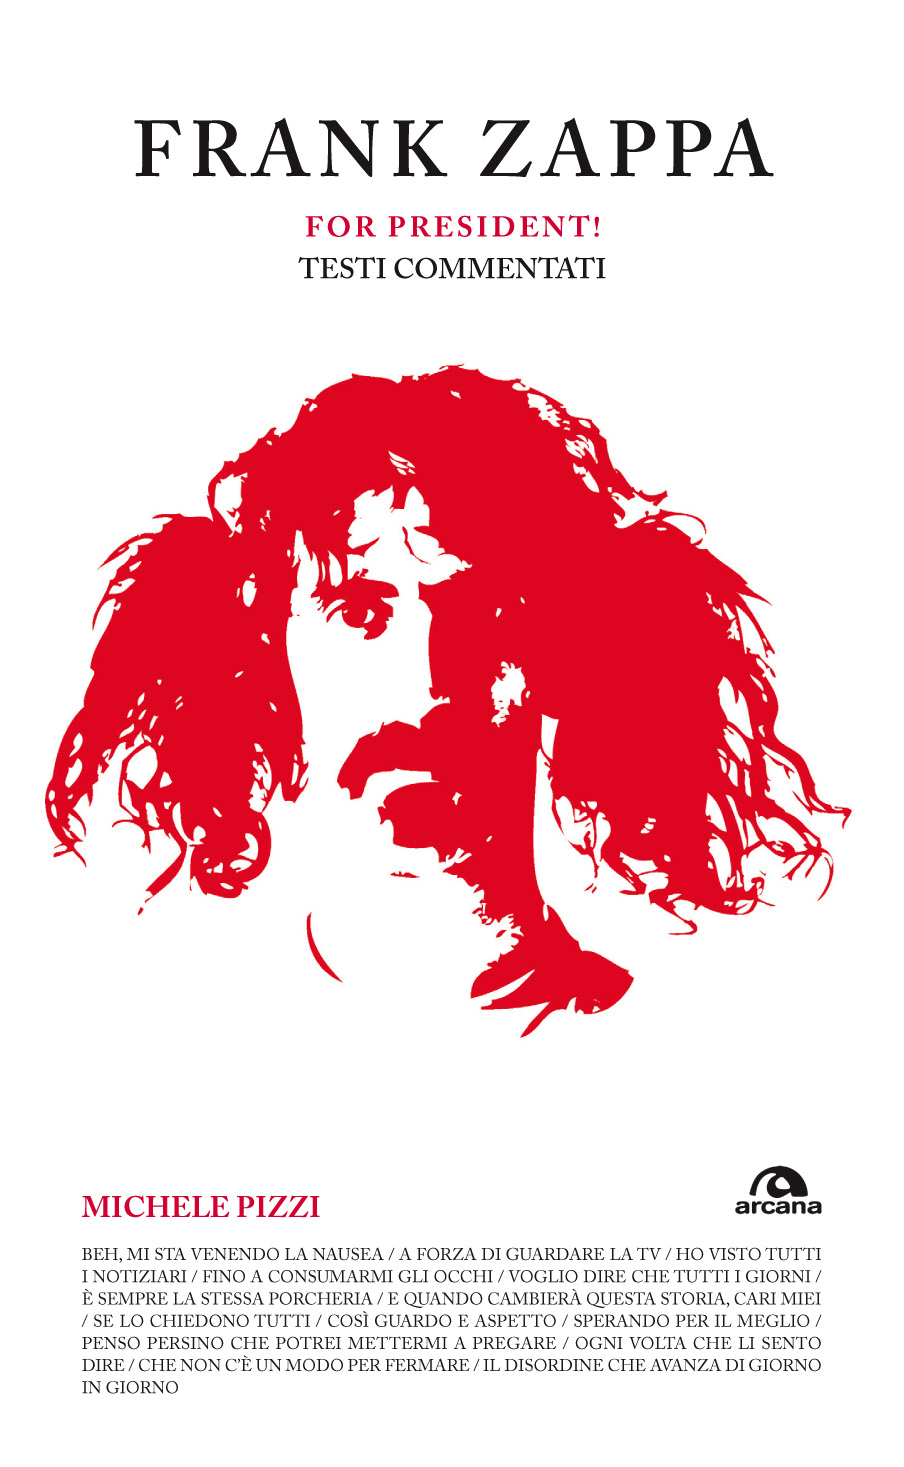 More about Frank Zappa